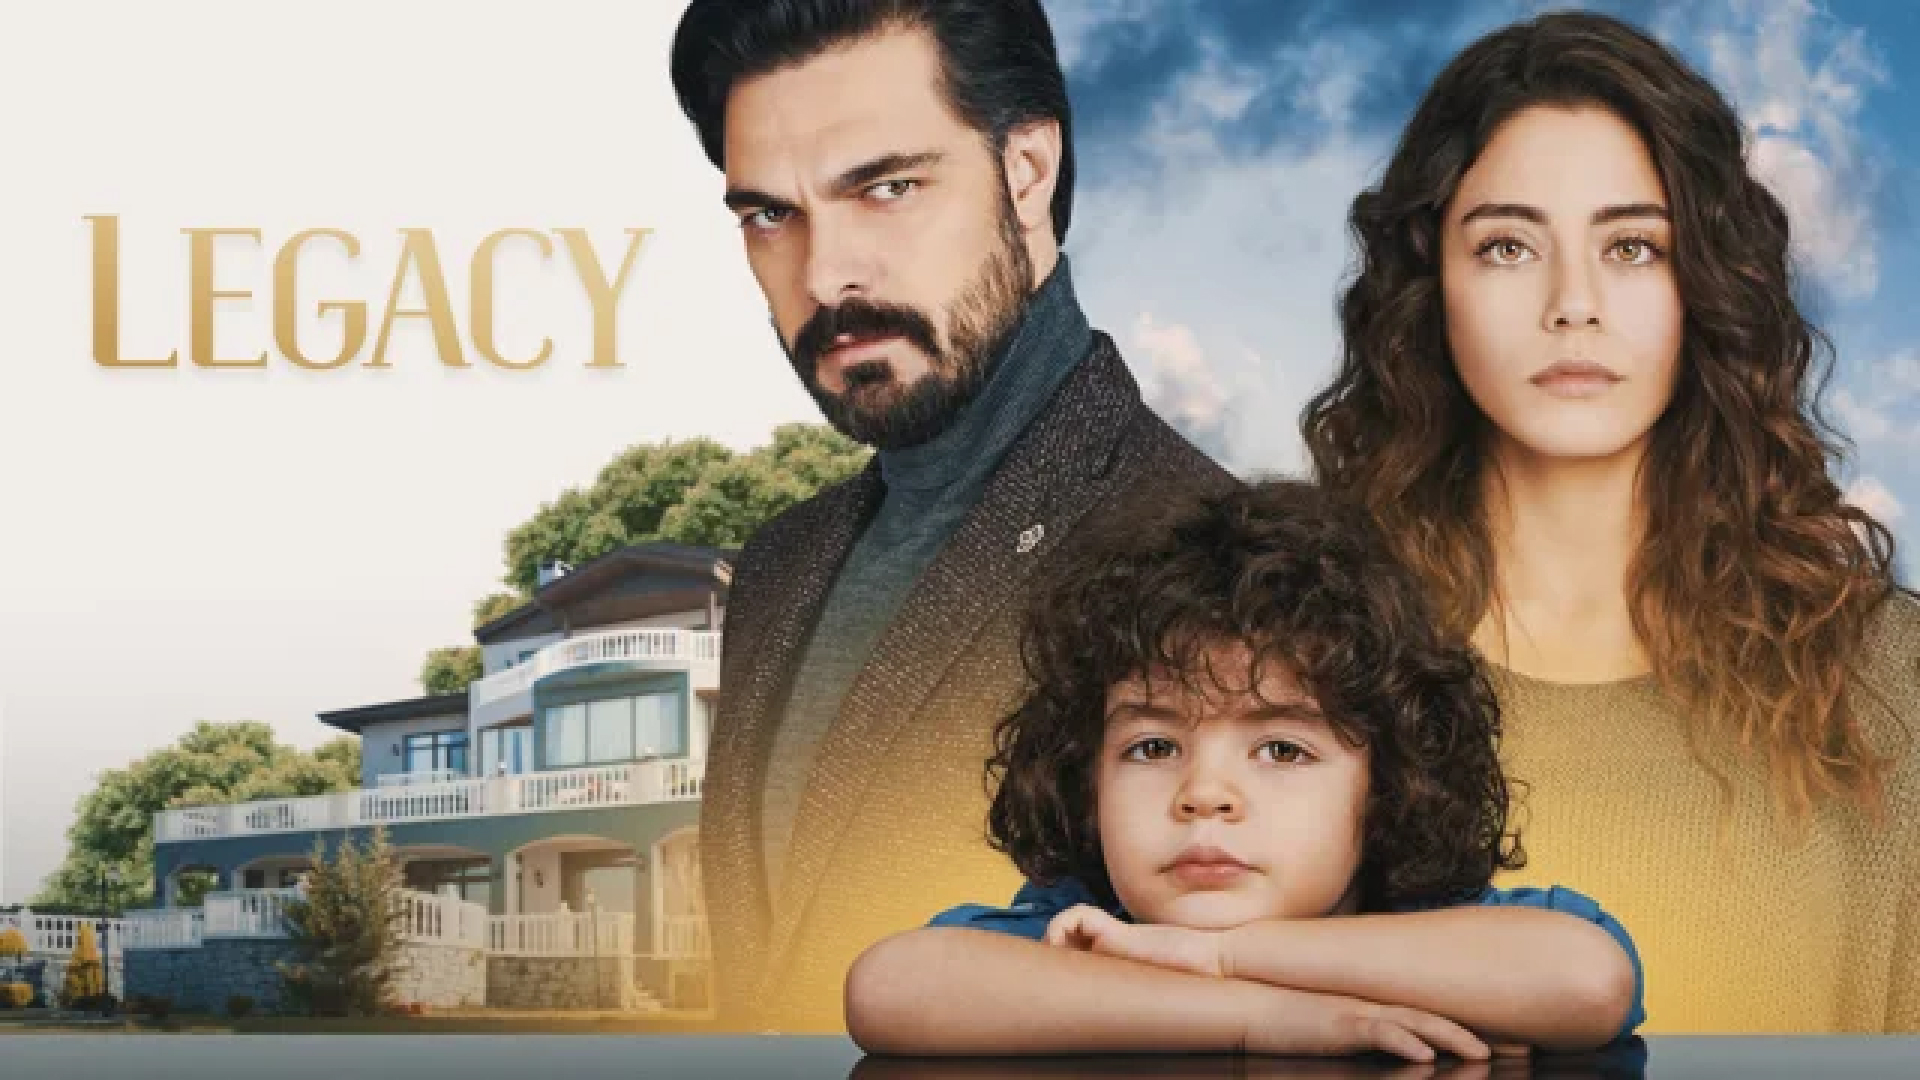 A Full Overview of Emanet Turkish Series